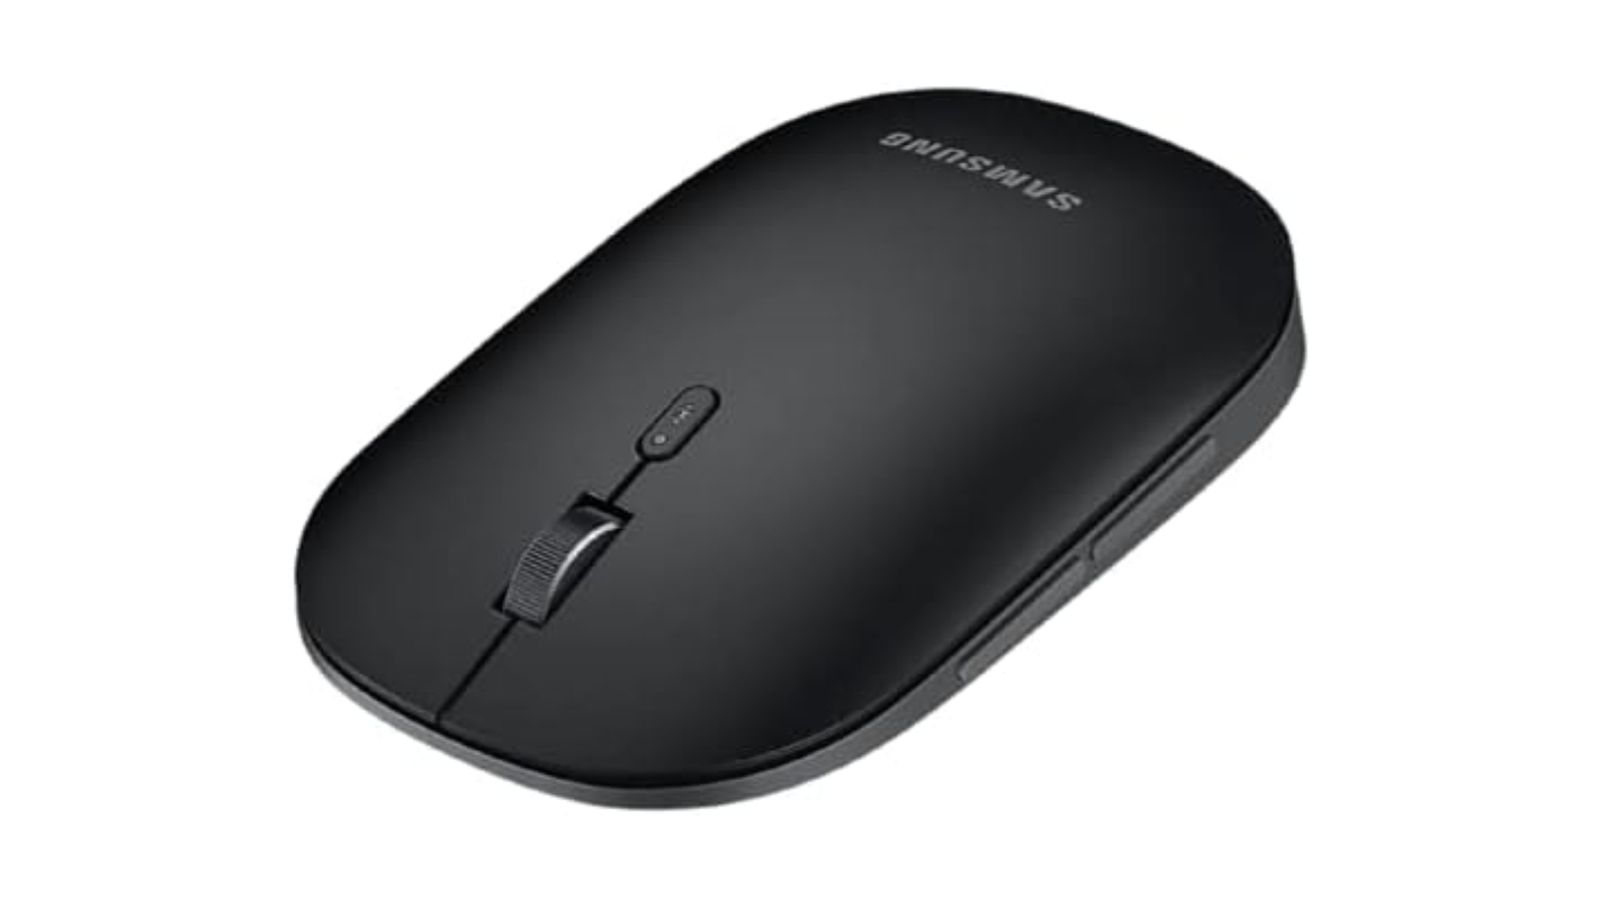 Samsung Bluetooth Mouse product image of an all-black wireless Samsung mouse.